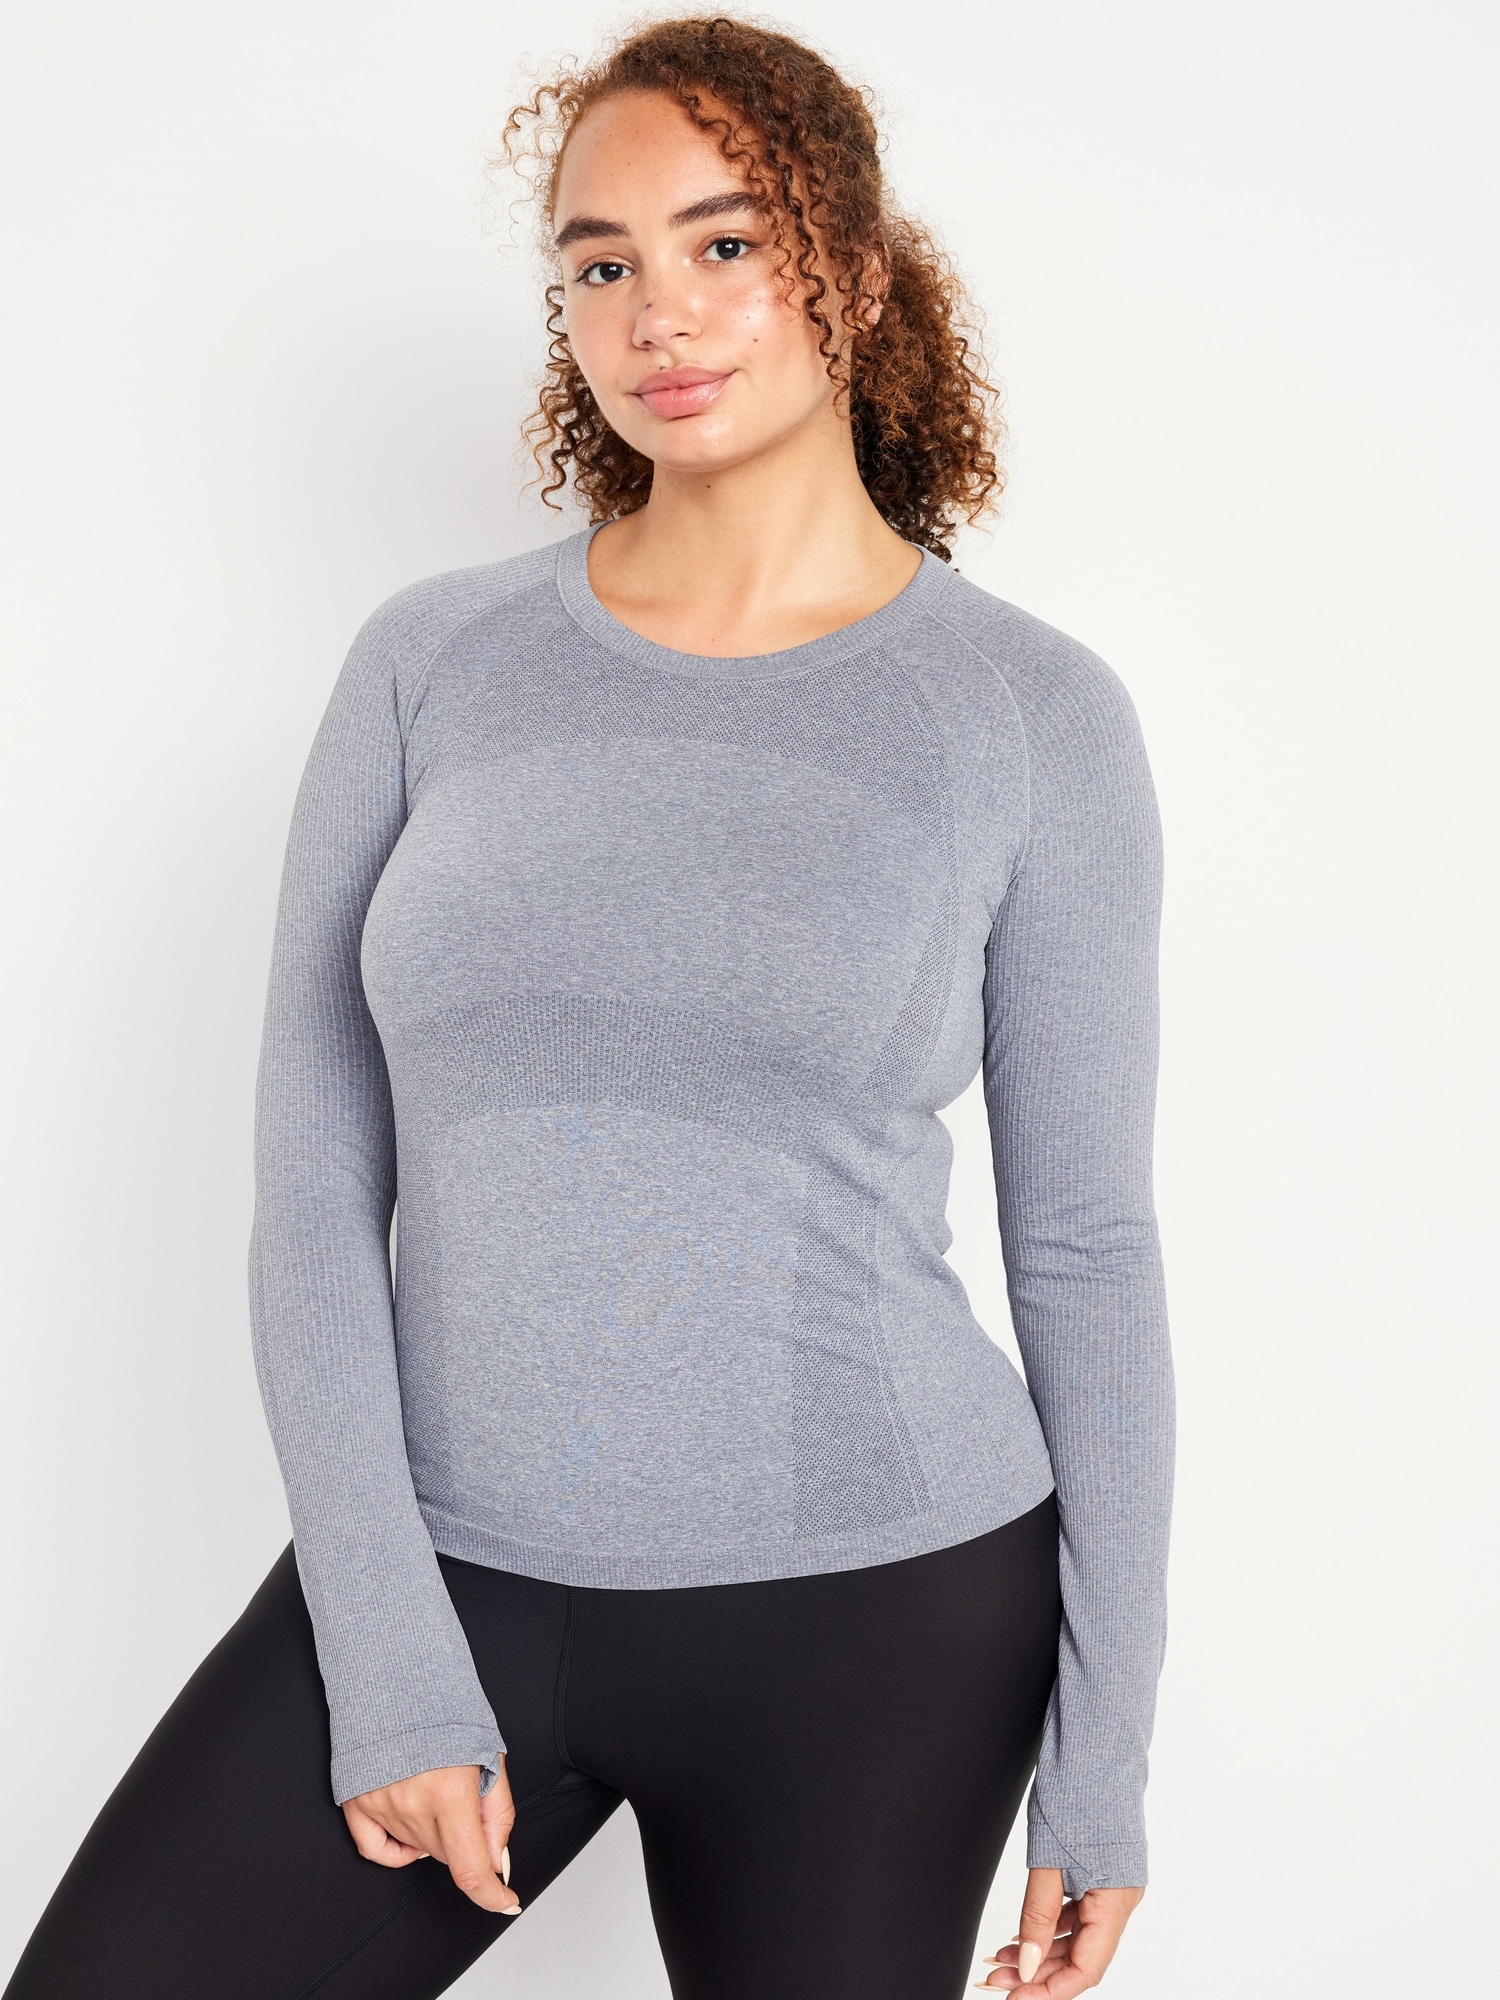 Long-Sleeve Seamless Performance Top for Women | Old Navy